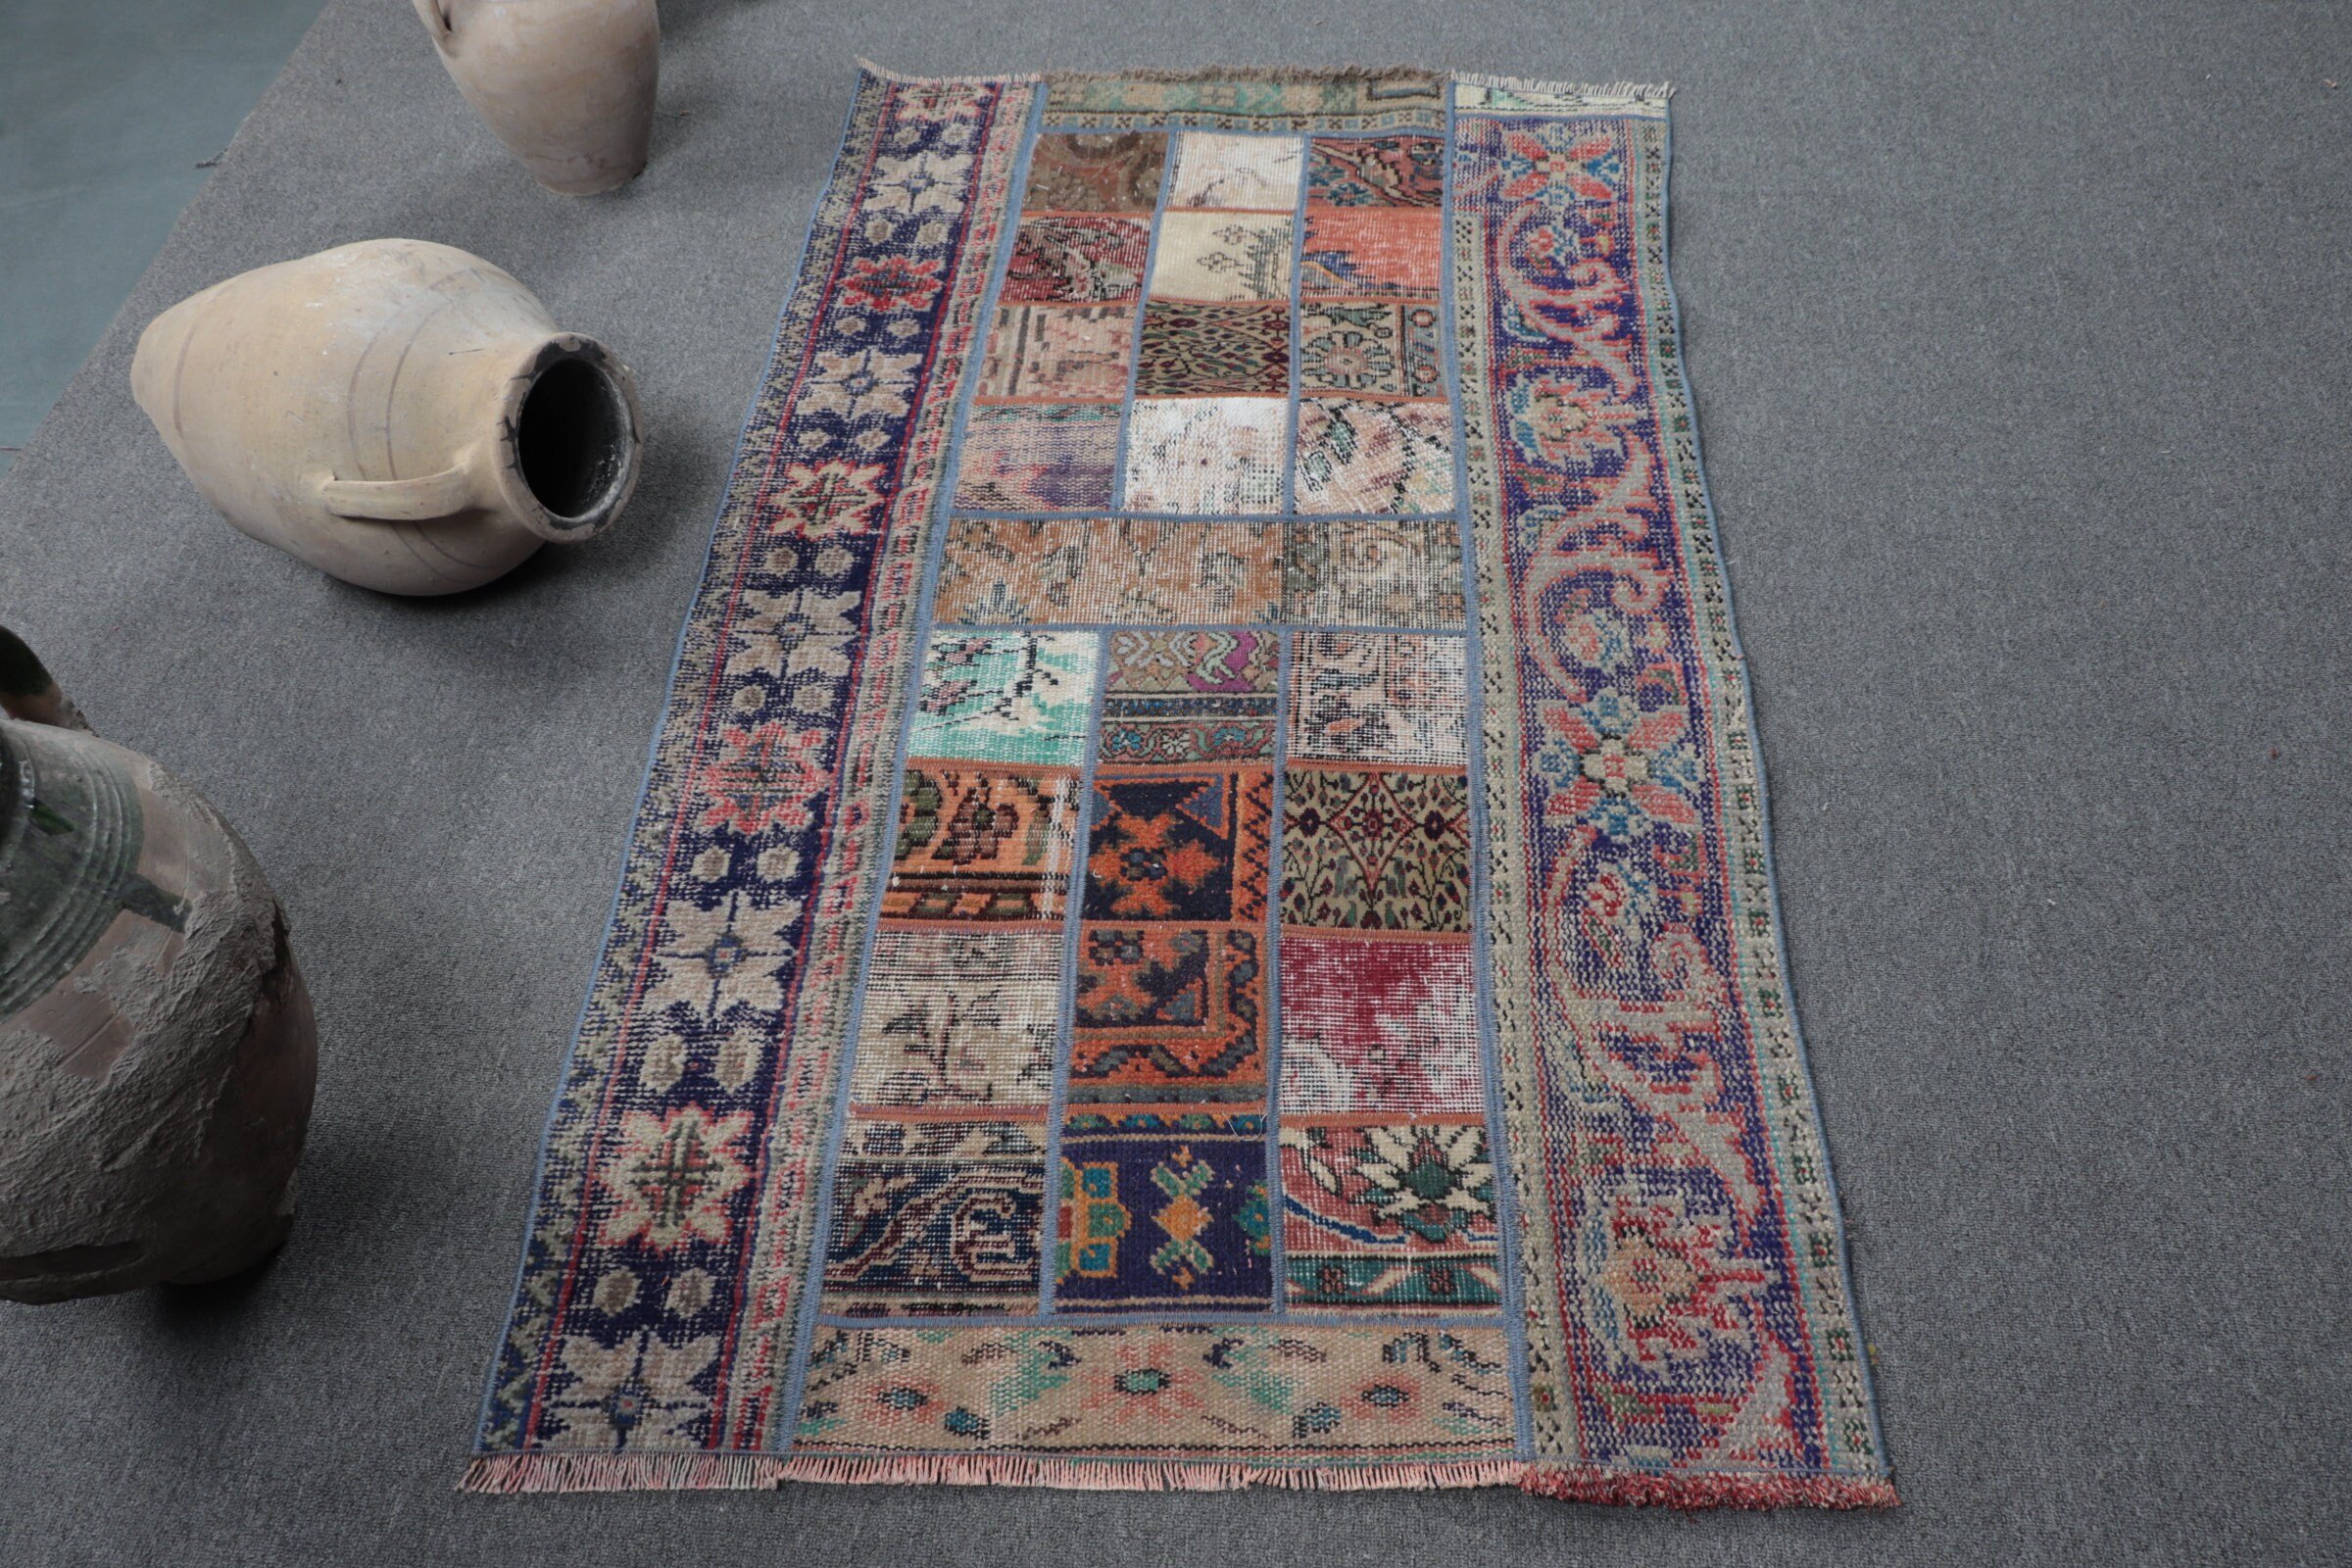 Oriental Rugs, Kitchen Rugs, Nursery Rugs, Blue Cool Rugs, Turkish Rug, Vintage Rug, Muted Rug, Home Decor Rugs, 3x5.2 ft Accent Rugs